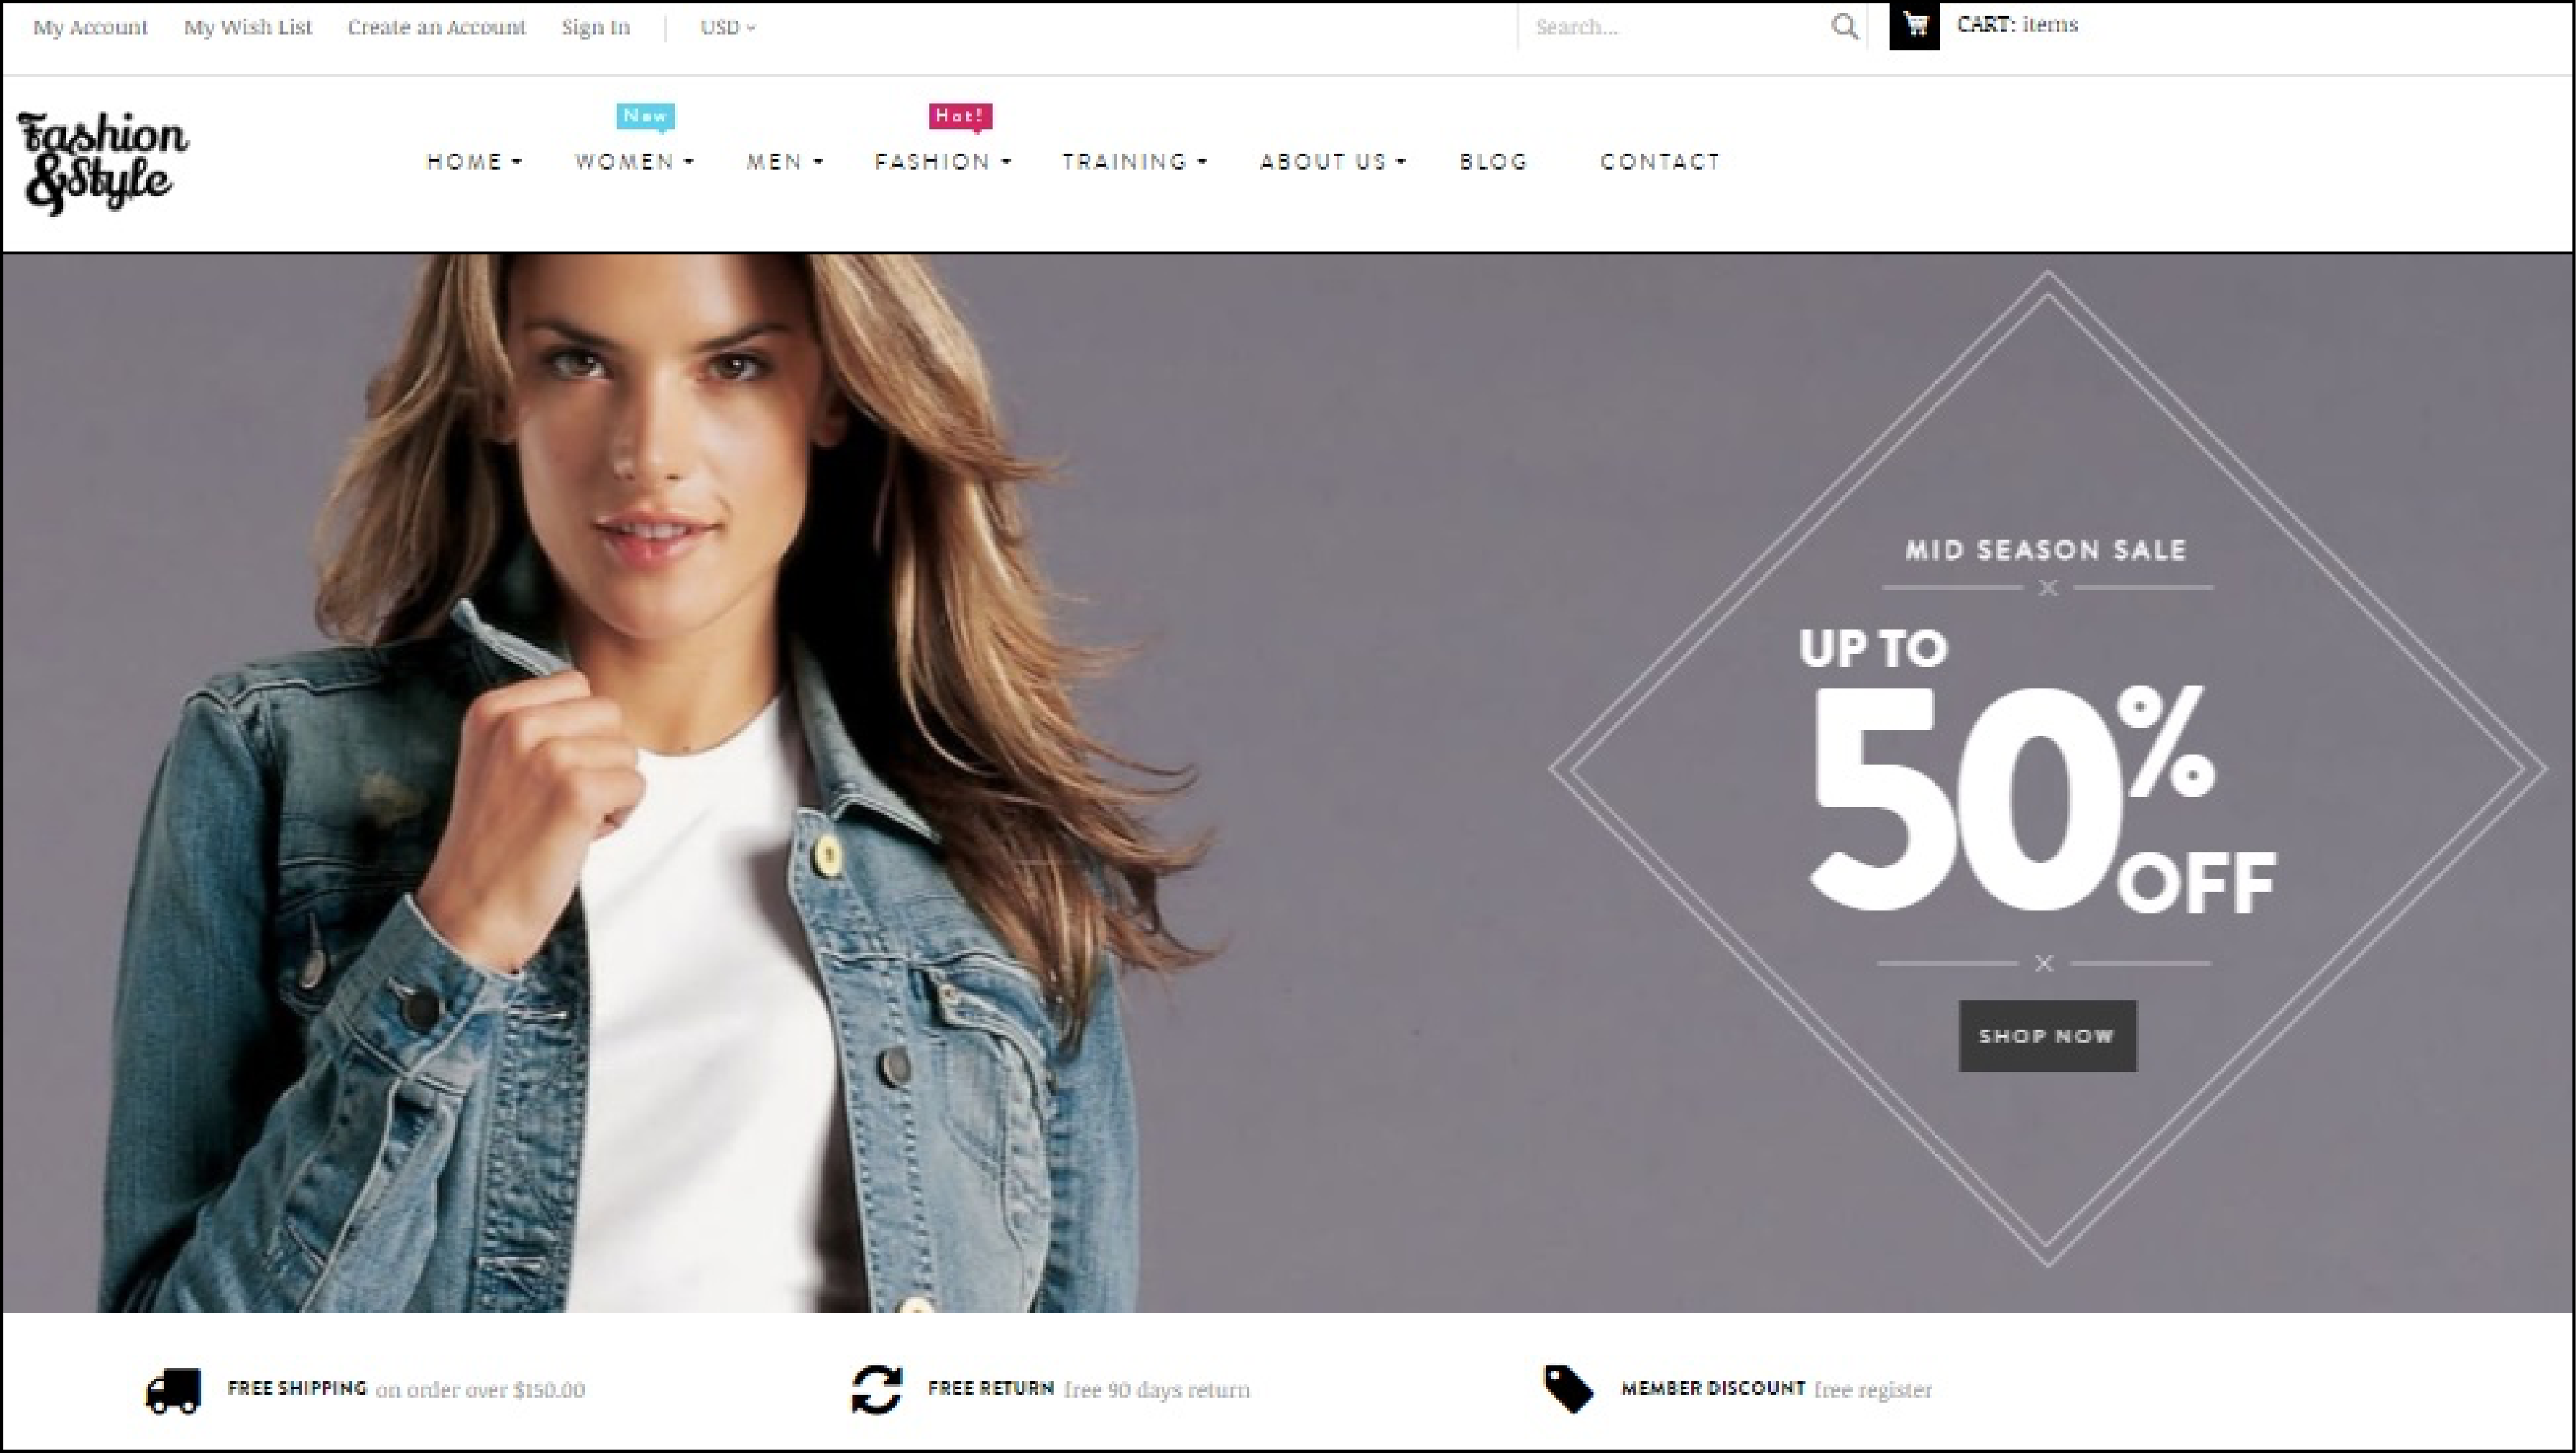 20+ Best Magento Themes and Templates -Ves Fashion